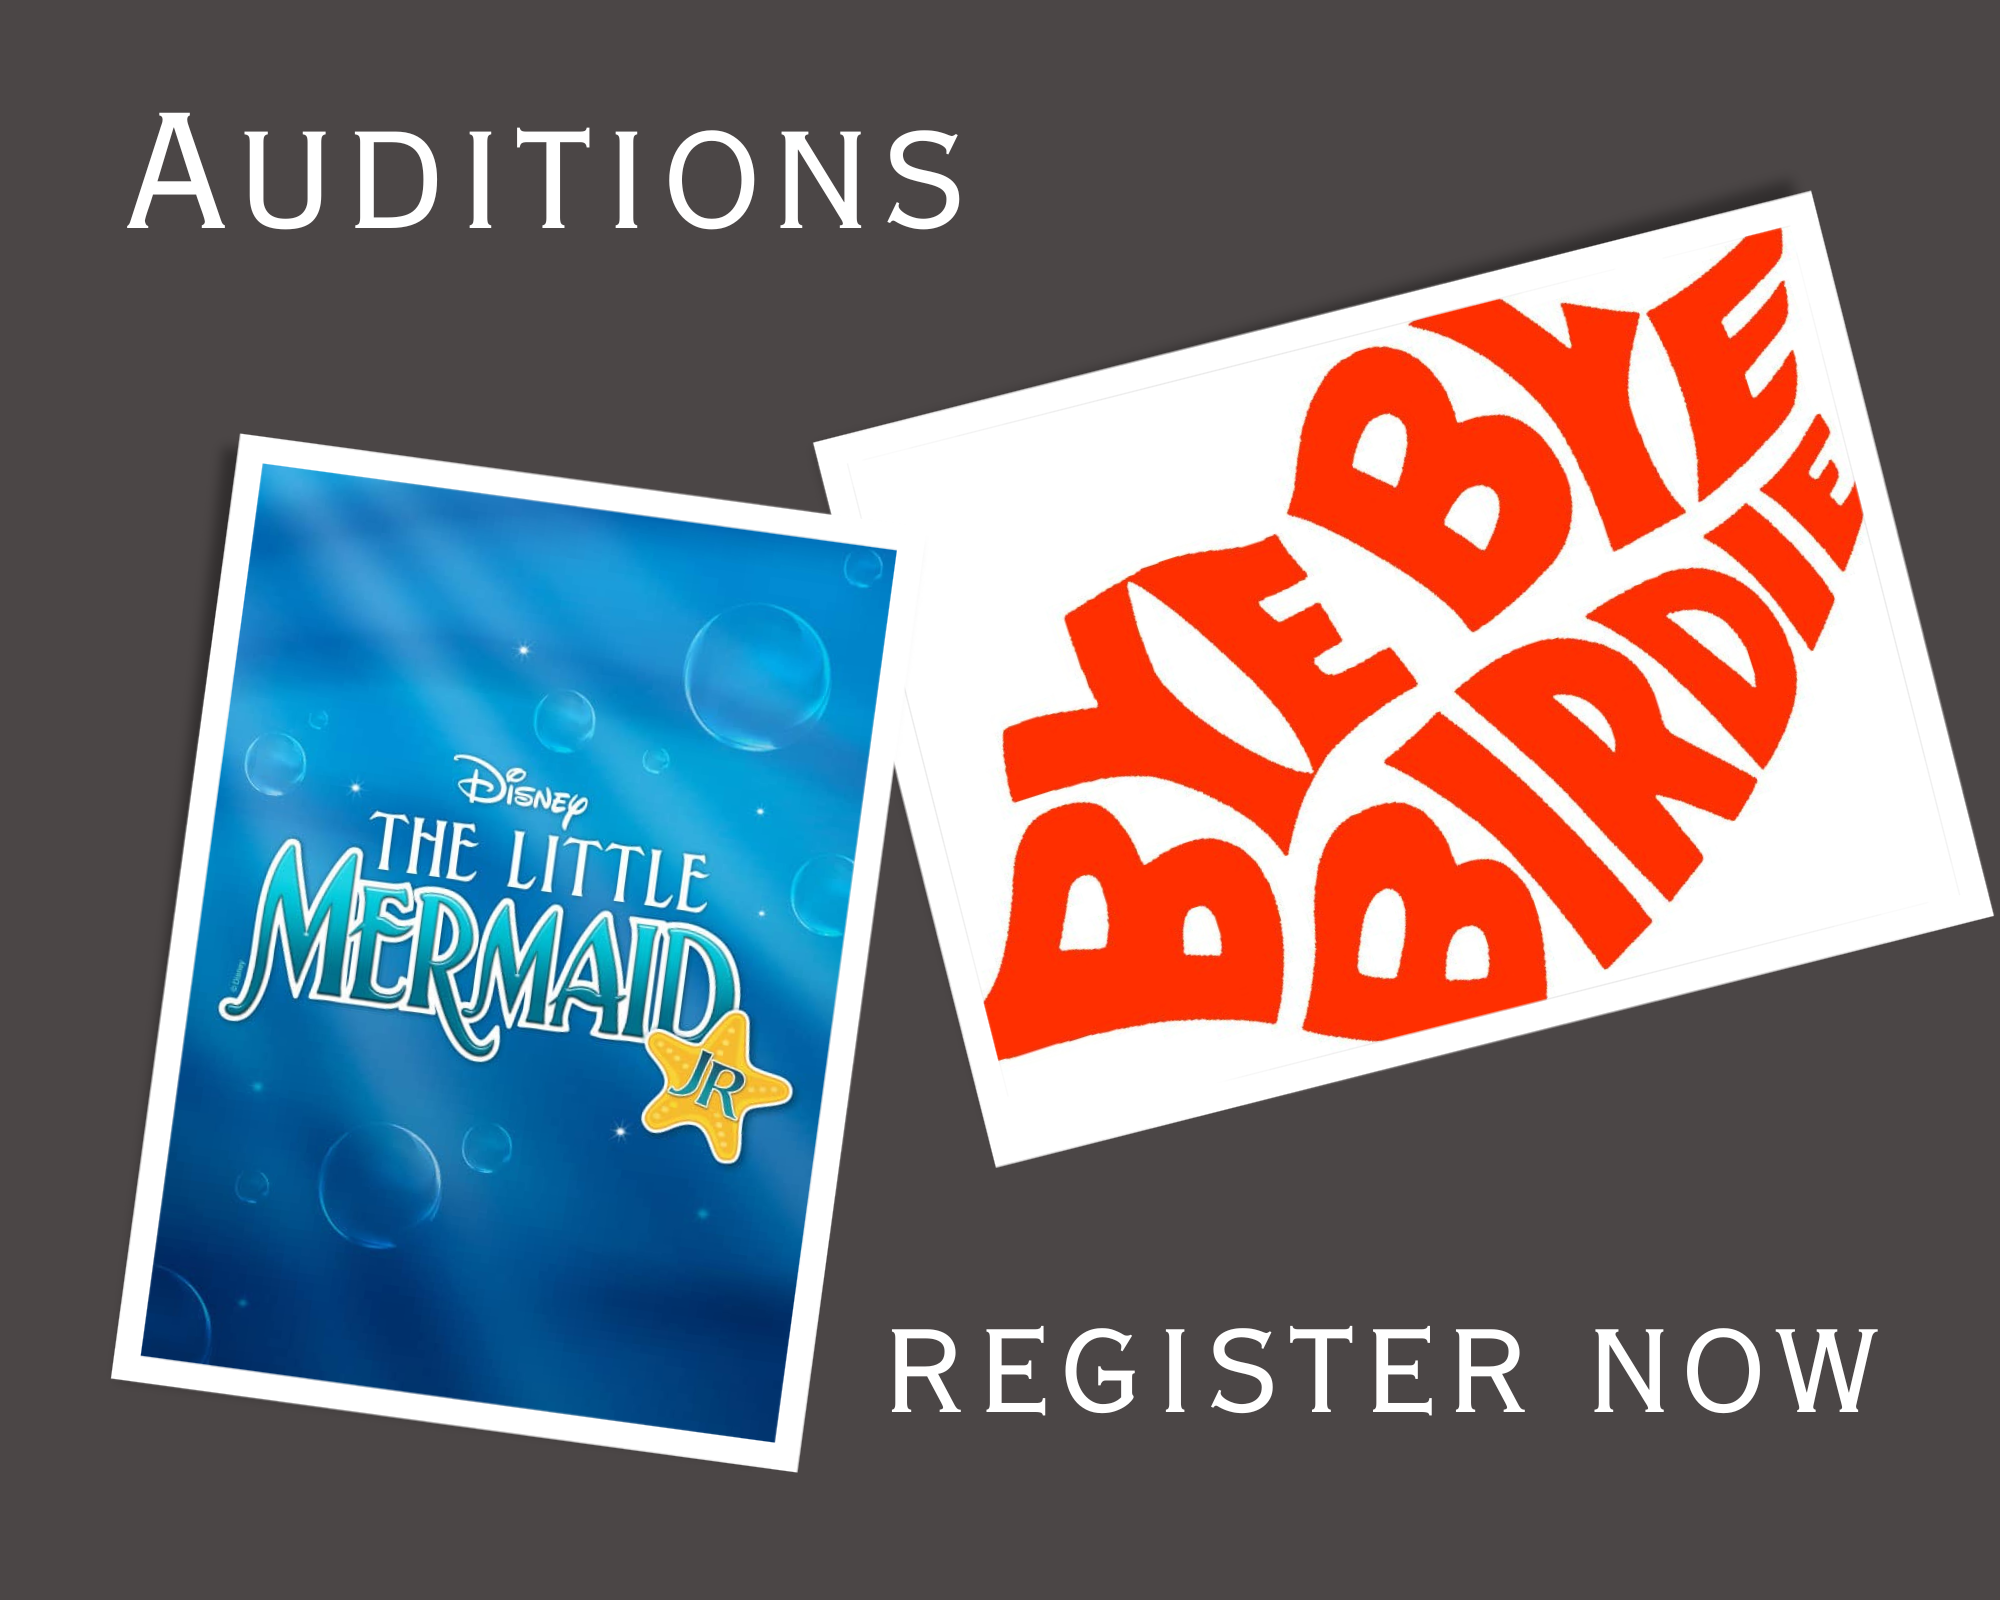 REGISTER FOR AUDITIONS